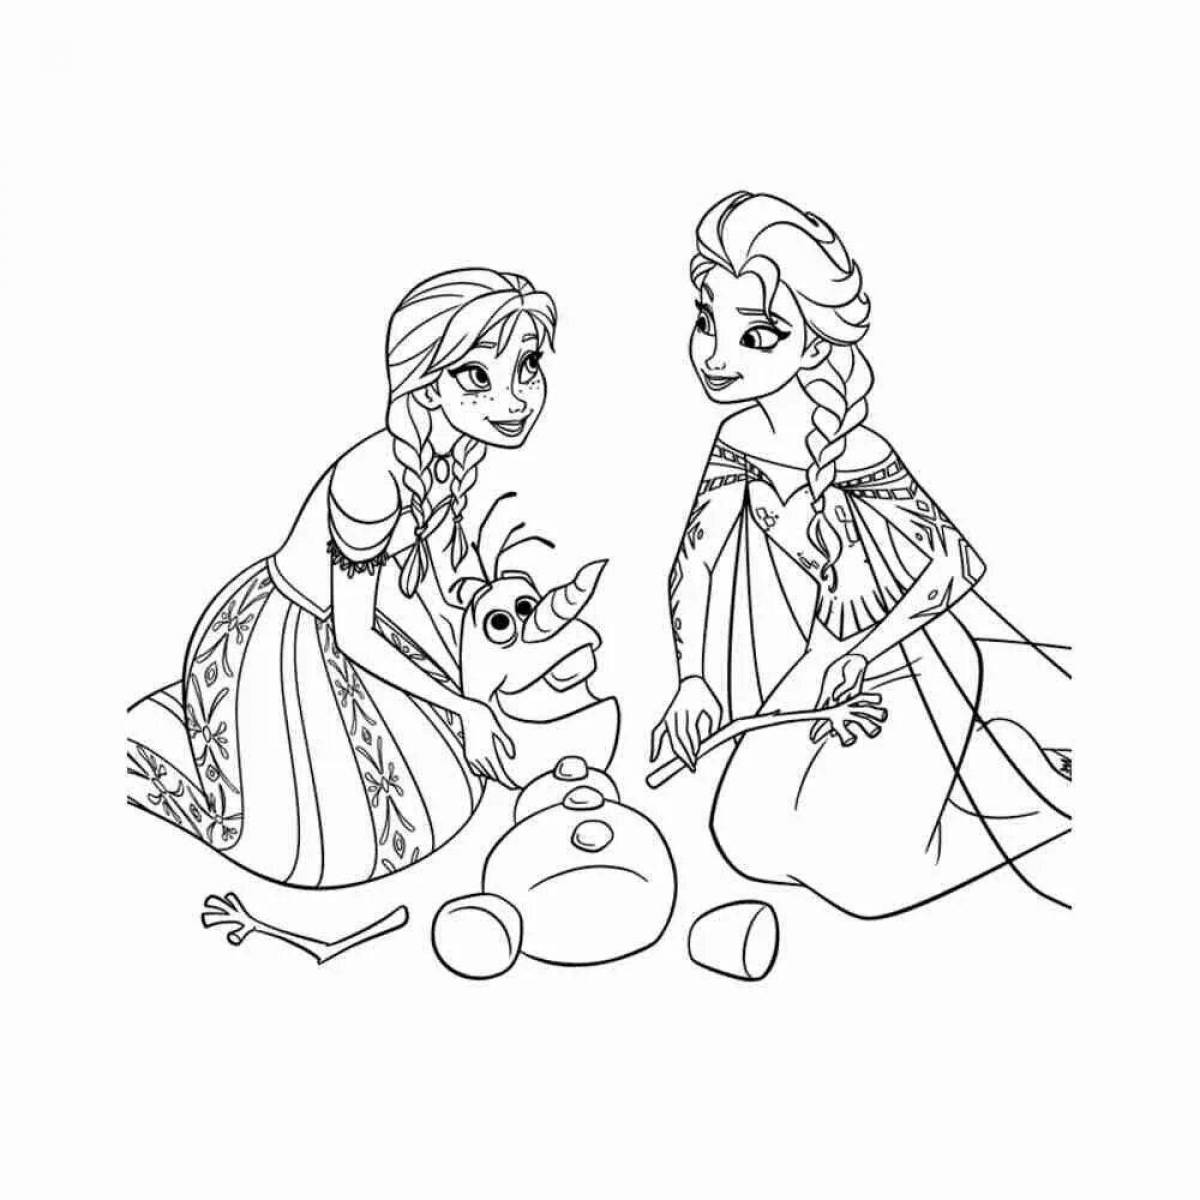 Funny anna and olaf coloring